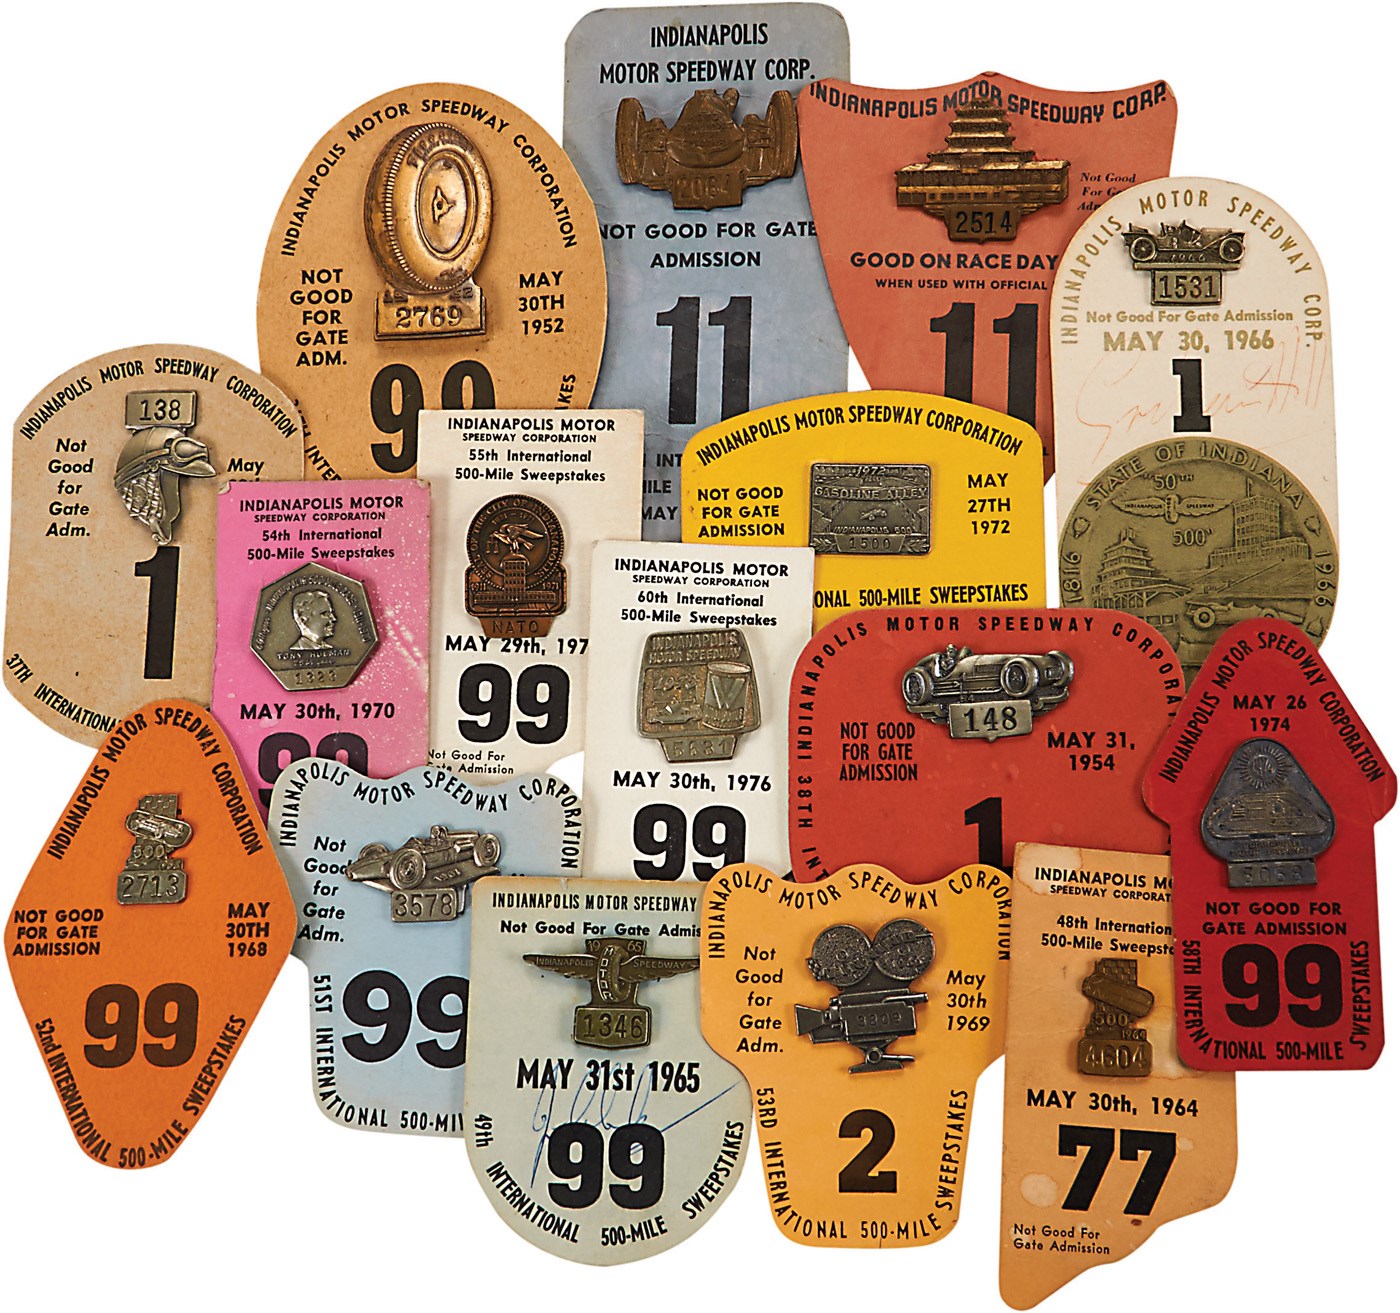 The Don Schmitz Indy 500 Collection Part II - 1947-2015 Near Complete Run of Indianapolis 500 Badges & Pit Passes (130+)